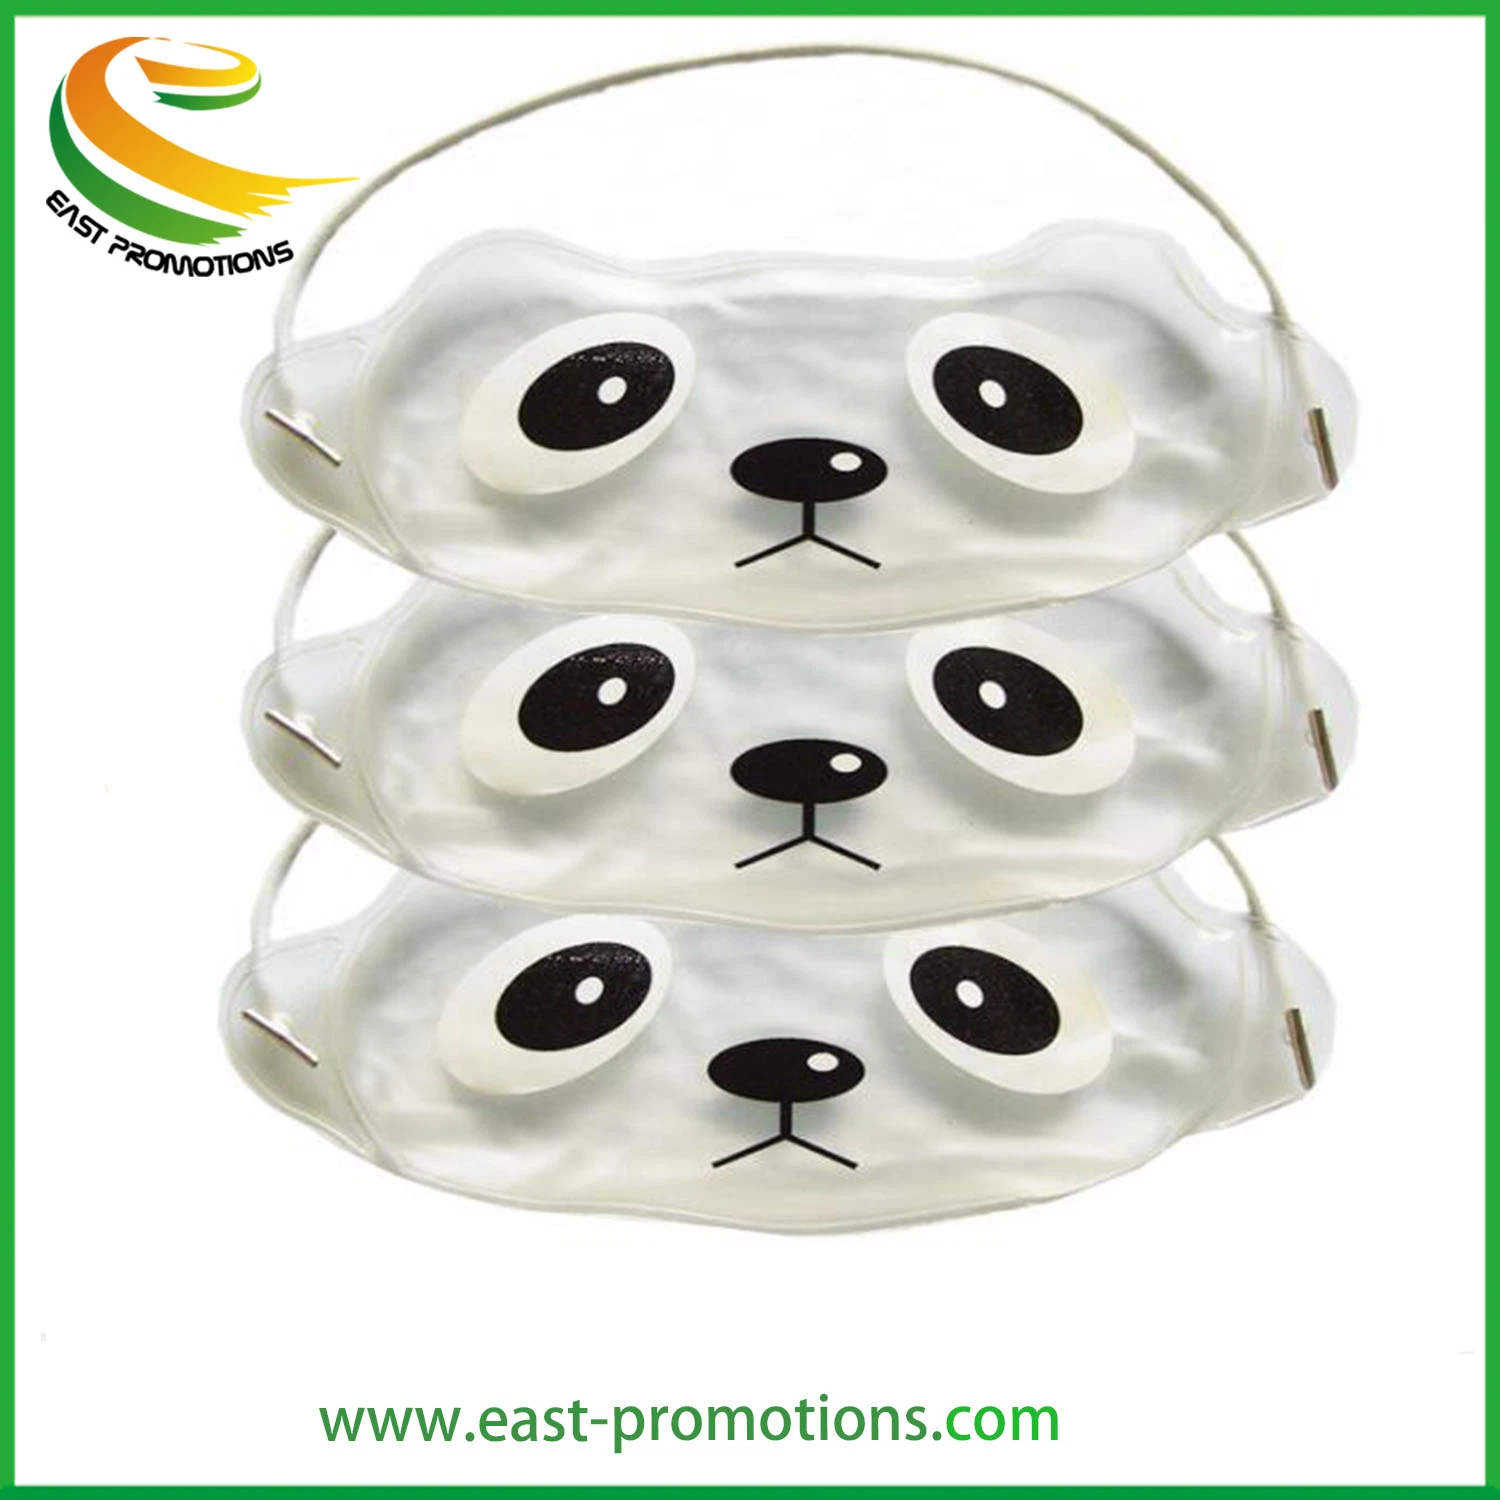 Reusable Sleep Hot Cold Gel Eye Mask for Eye Relax and Care Health